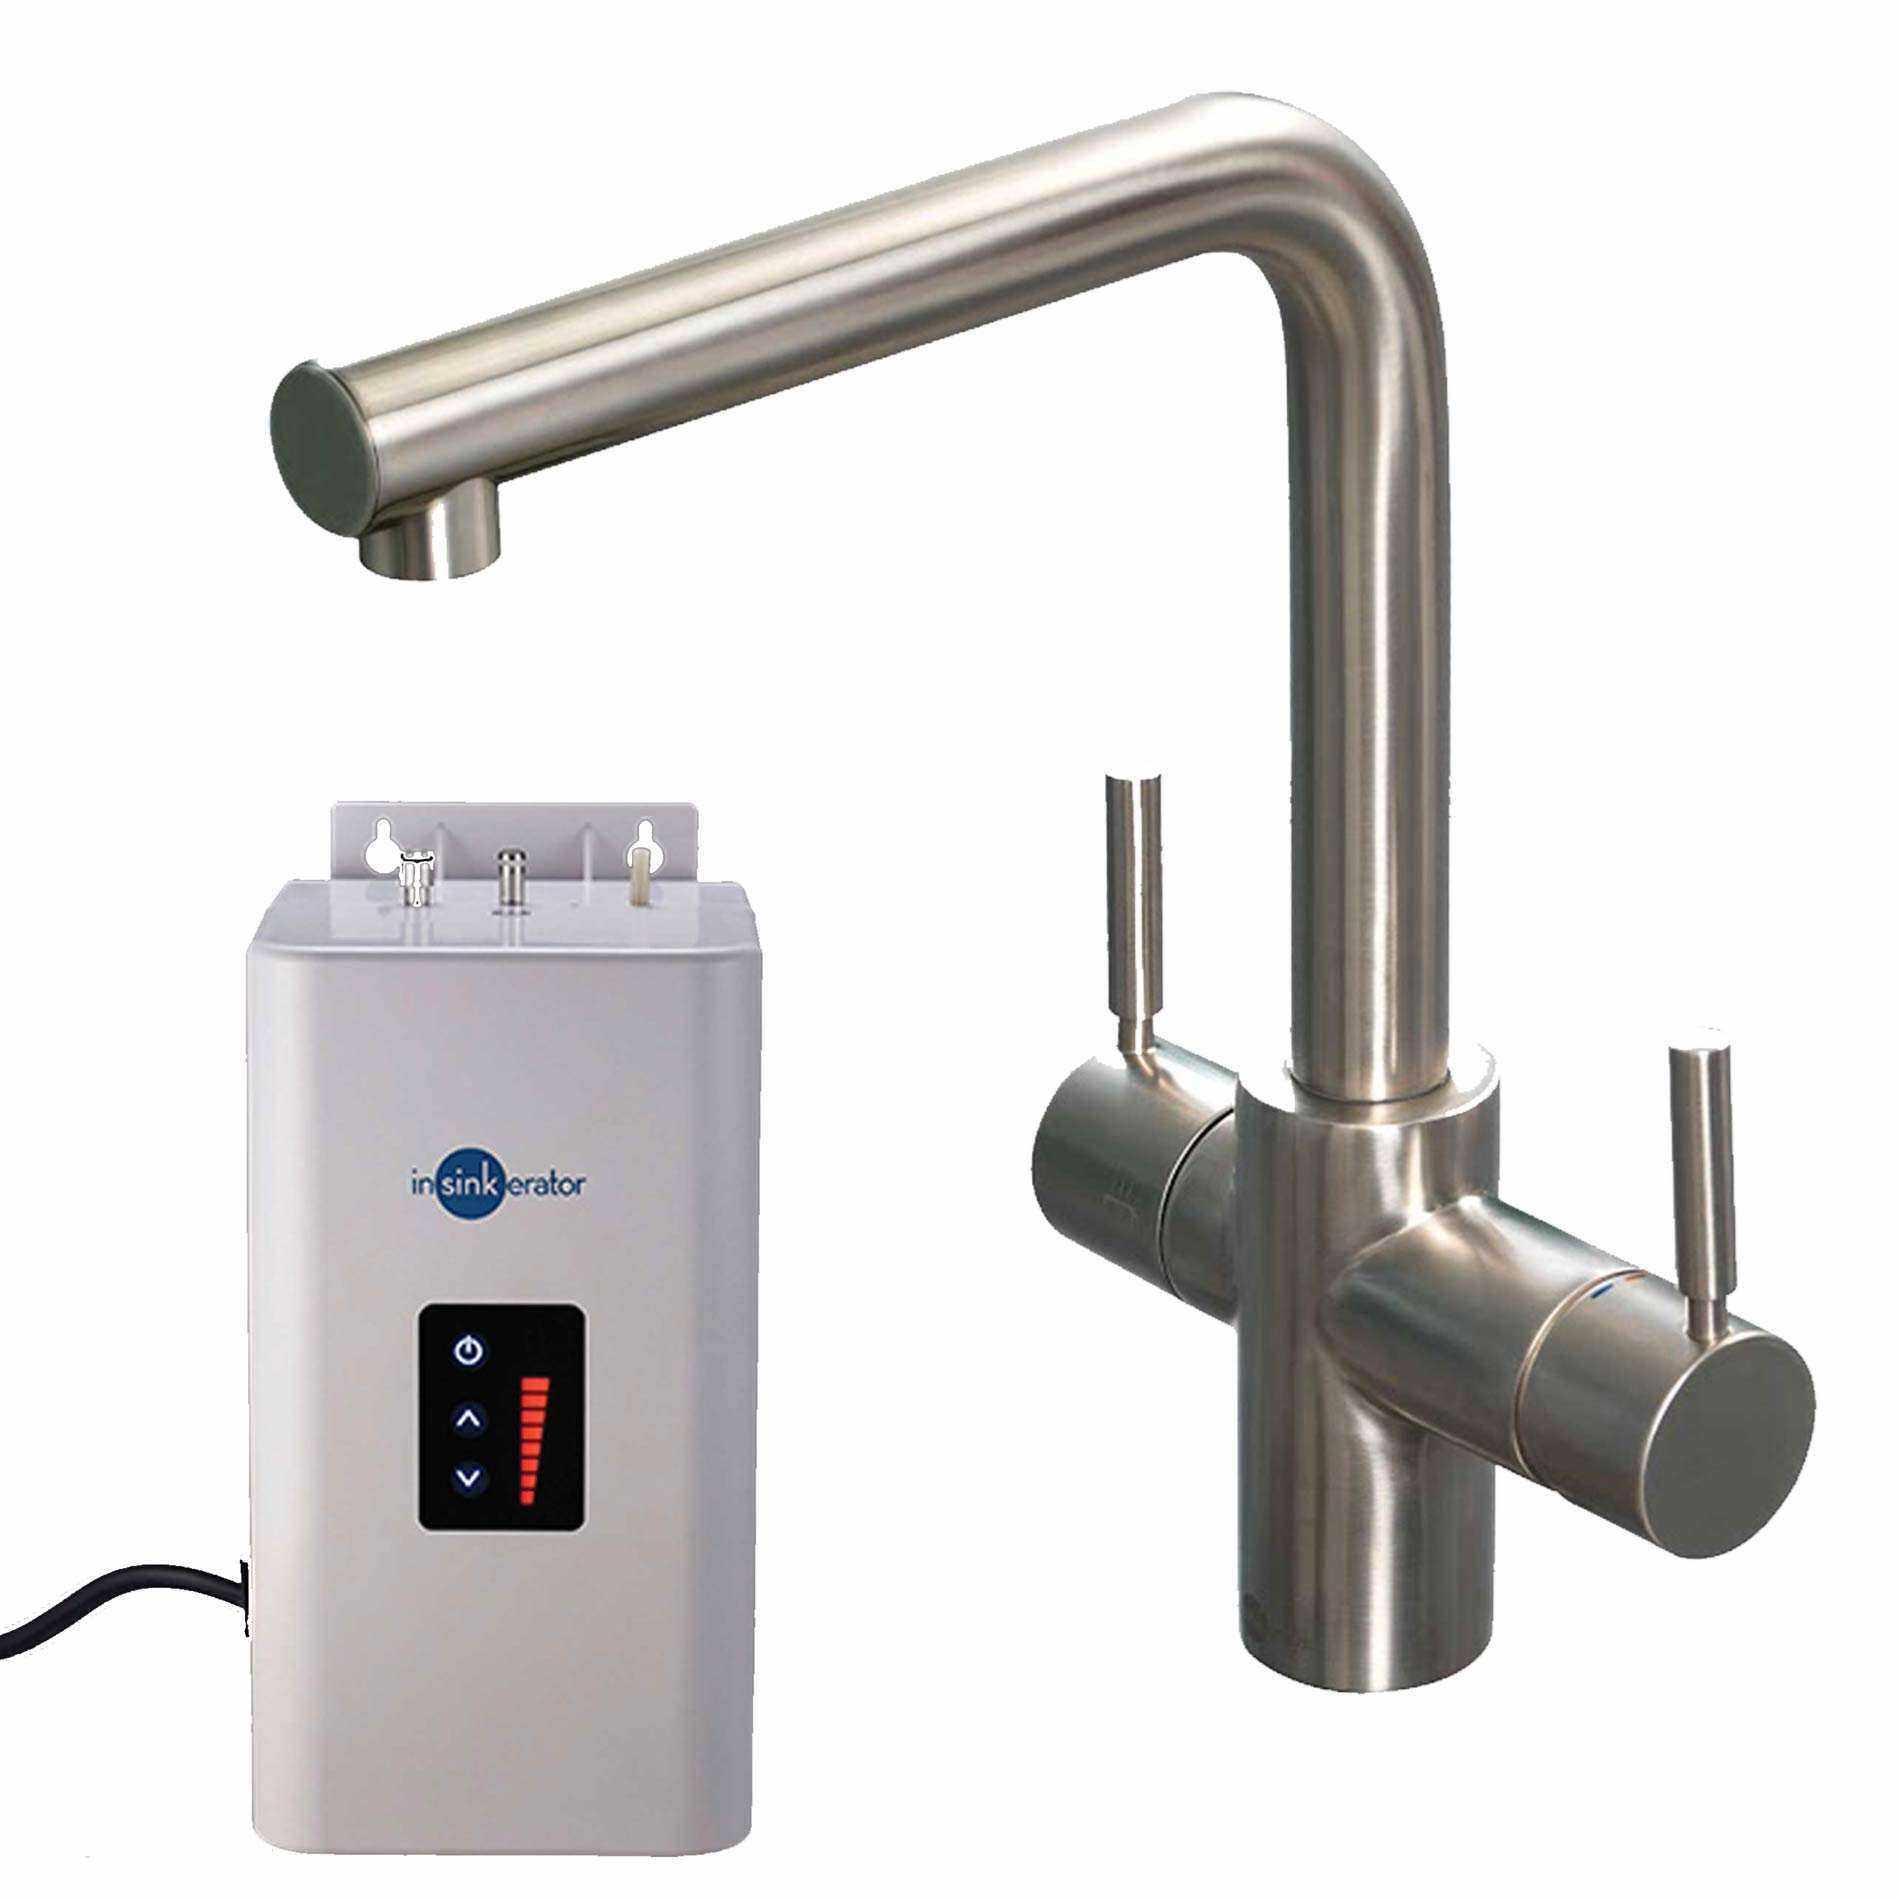 InSinkErator 3N1 Brushed Steel Filtered steaming hot & cold water tap & Neo Tank £300 reduction